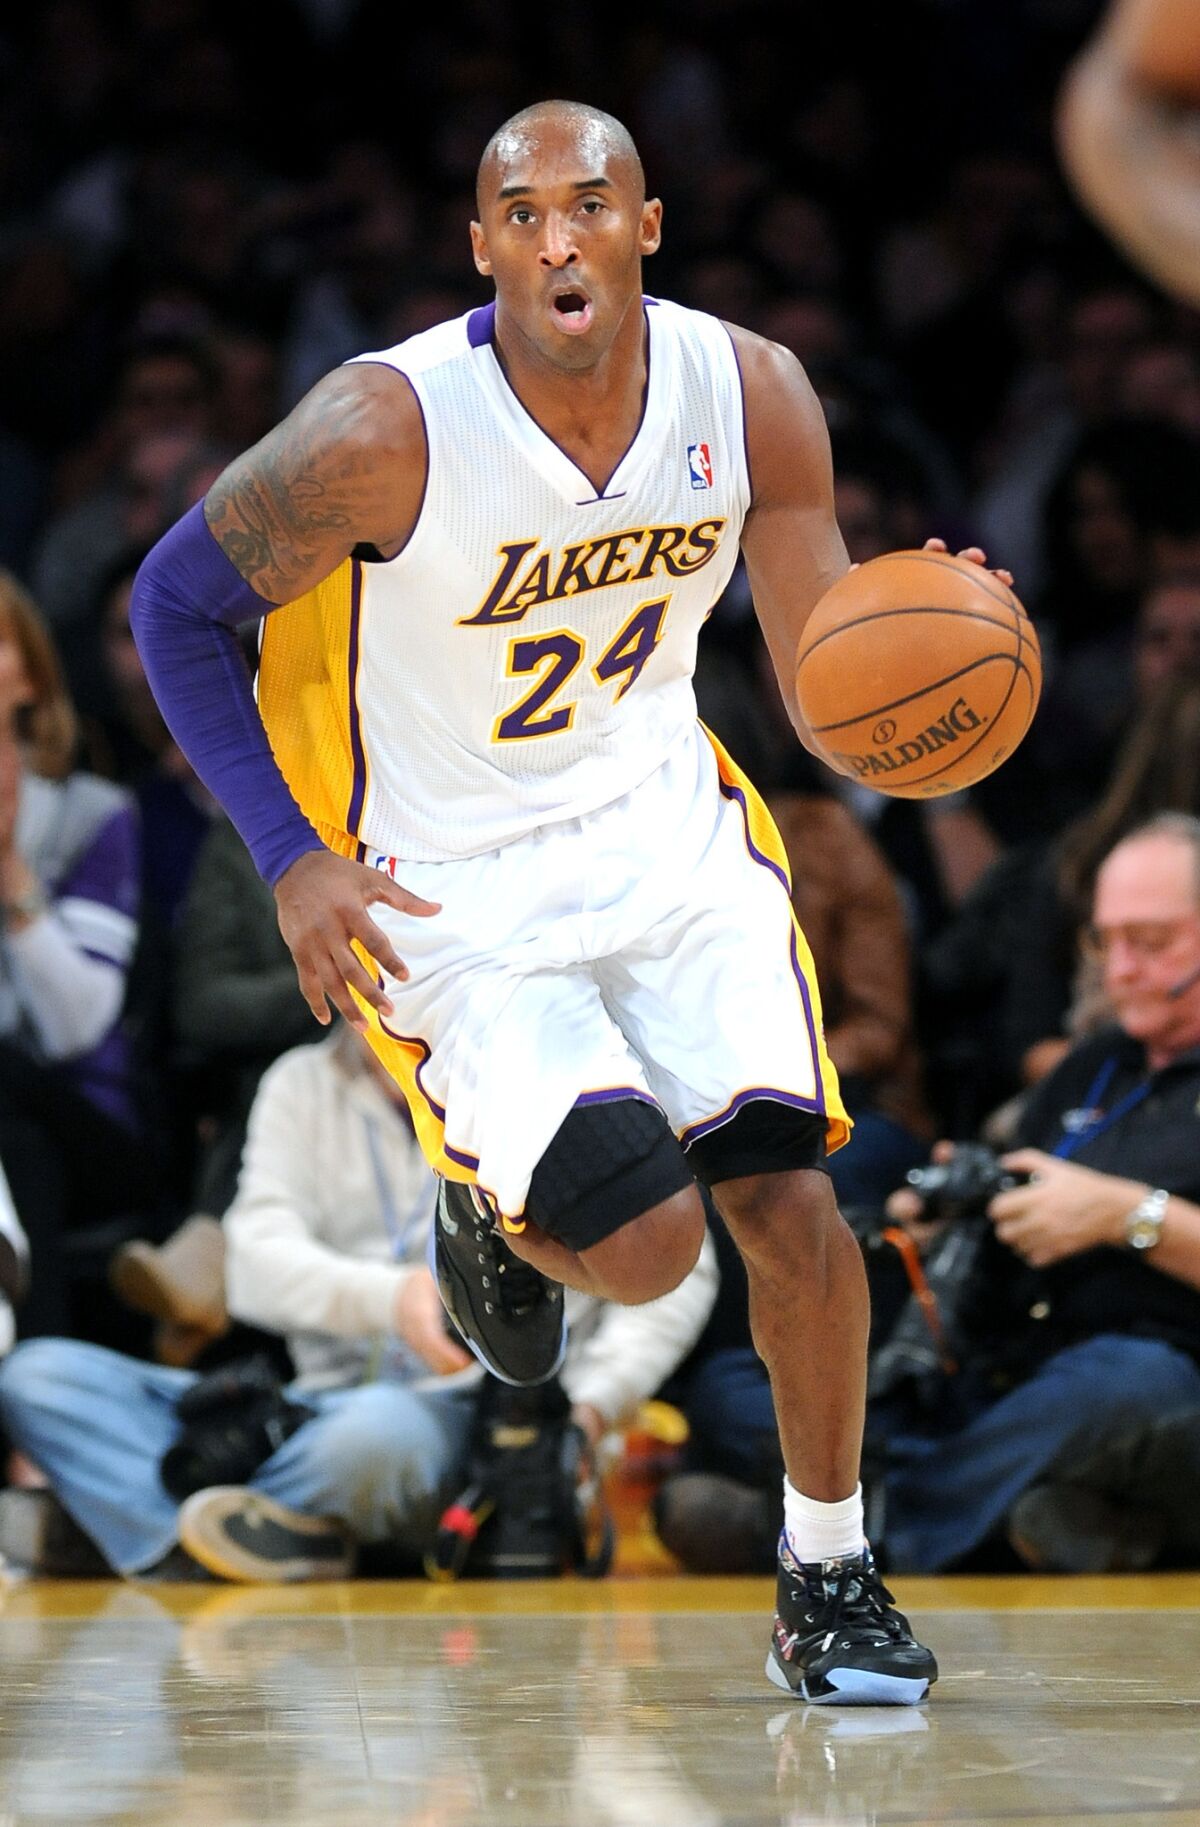 Kobe Bryant played for the Lakers for 20 years. The team retired both of his jersey numbers, 8 and 24.